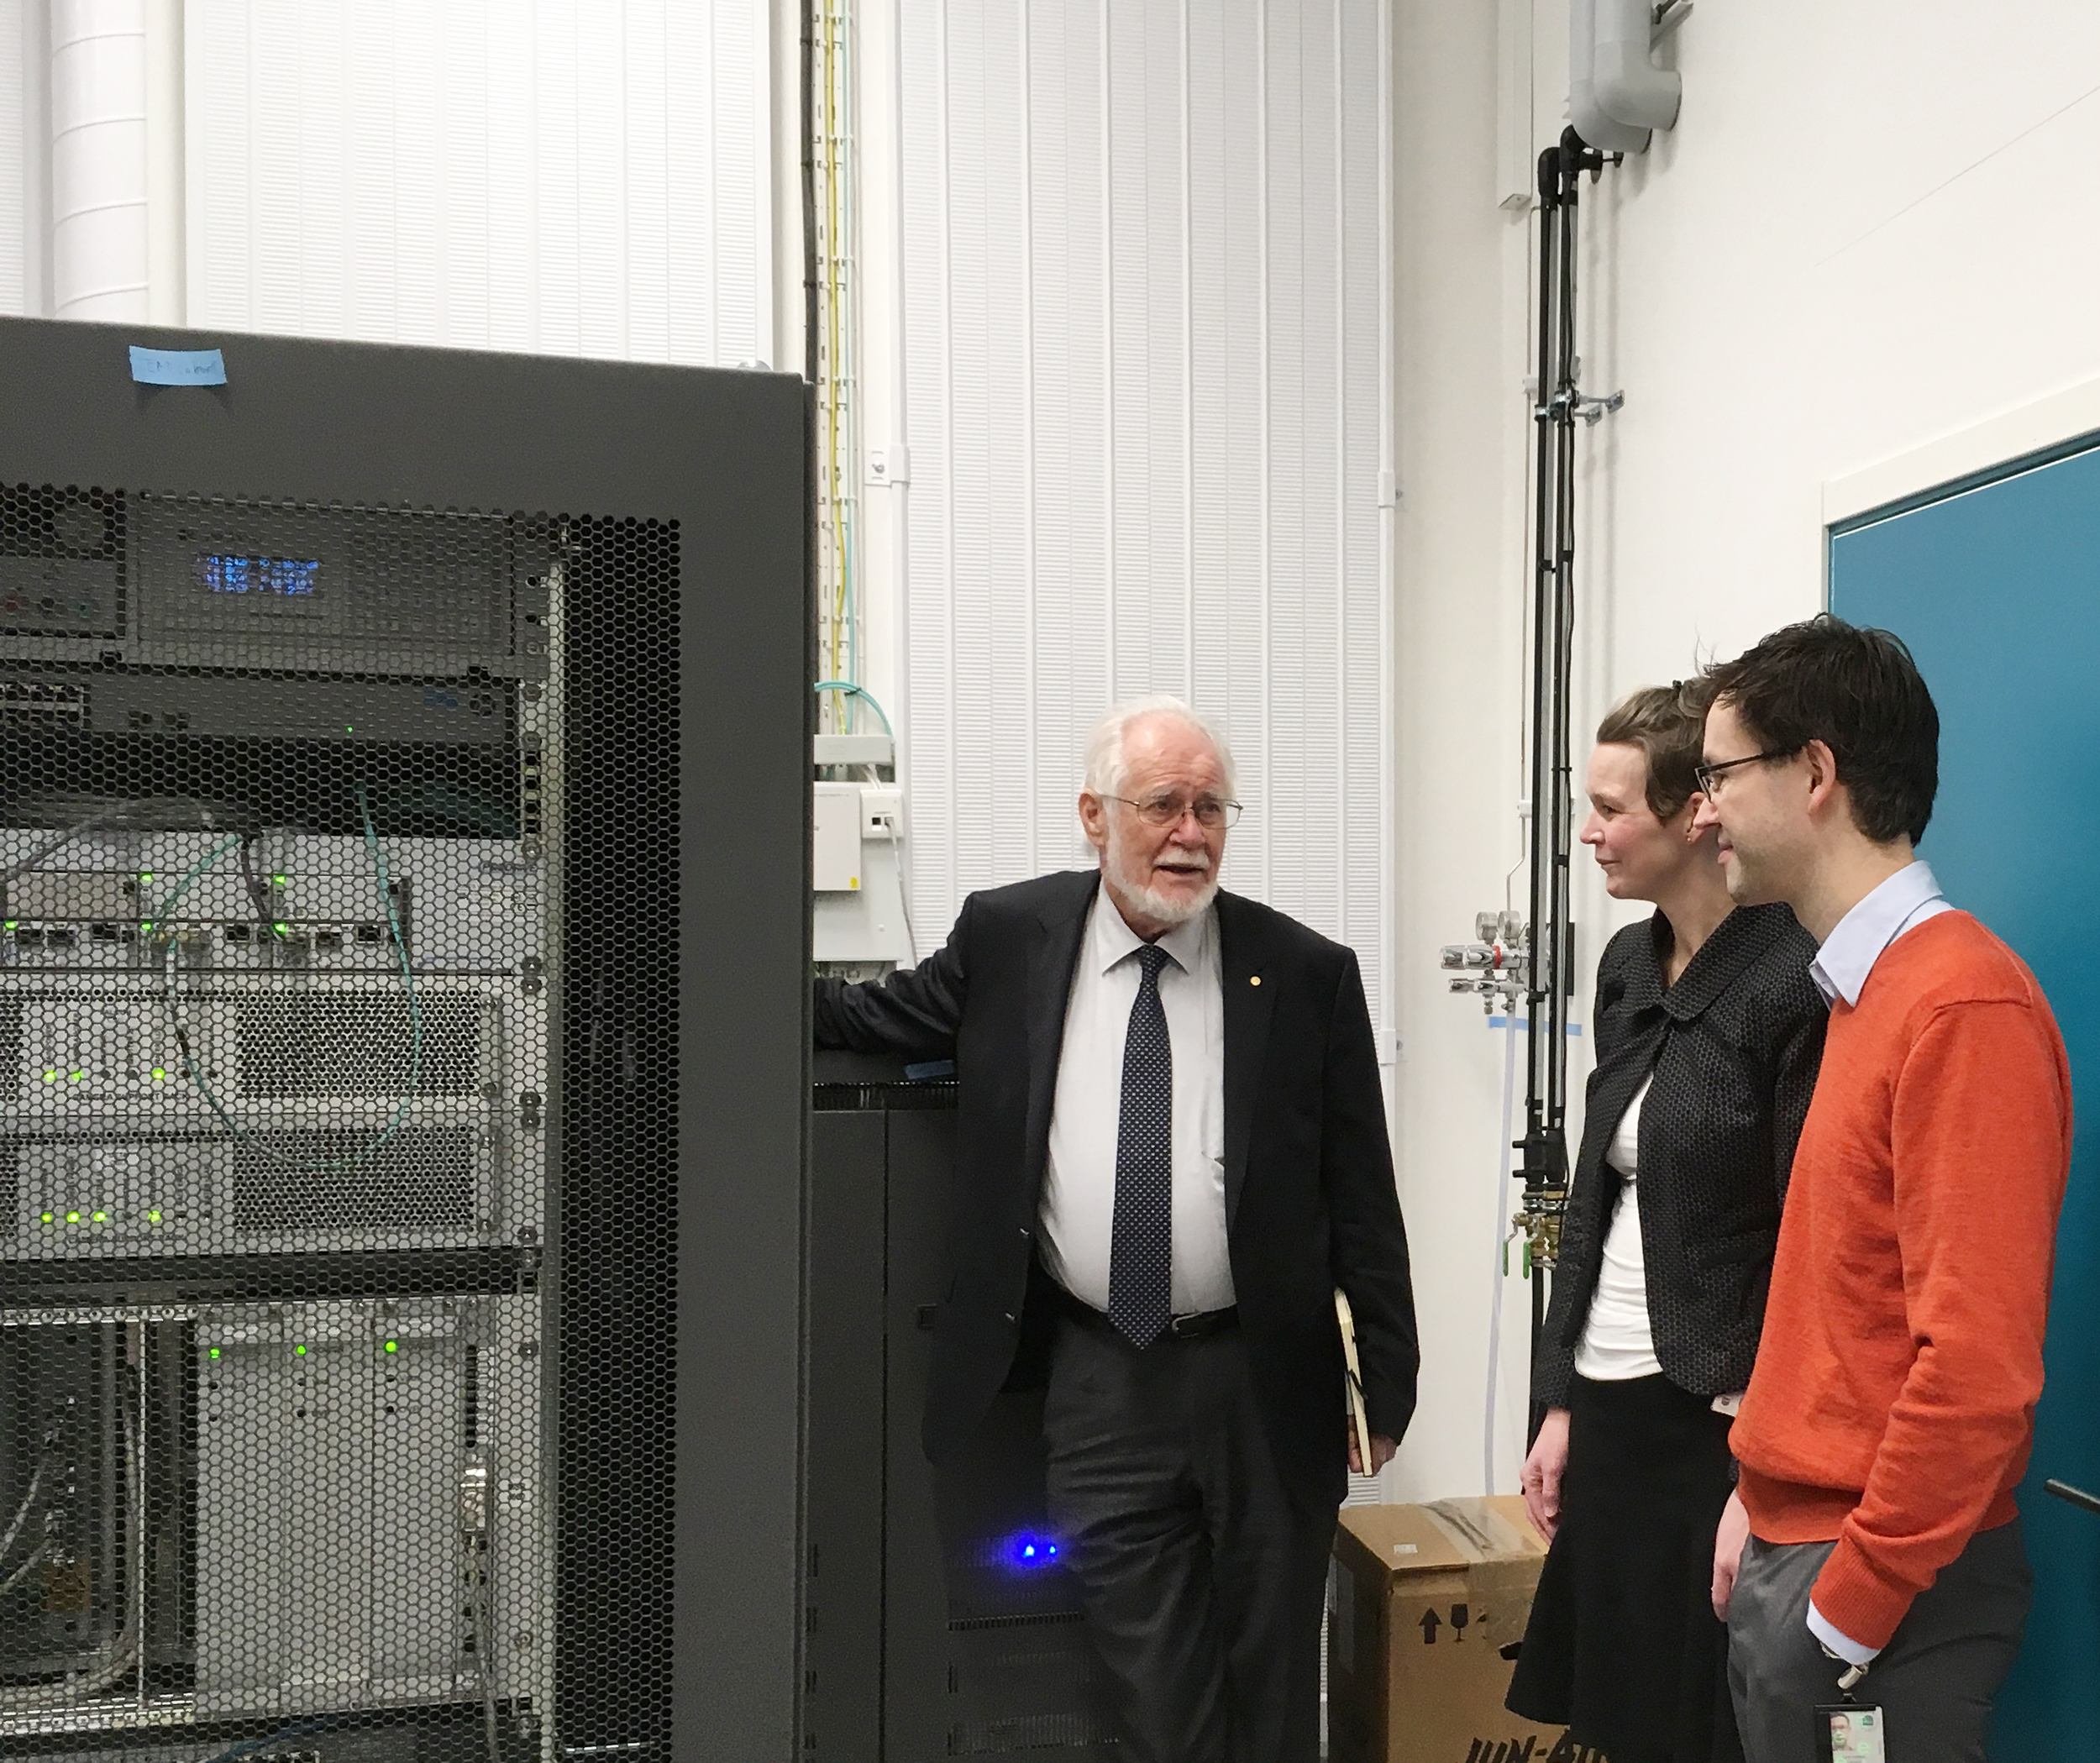 Jacques Dubochet, Nobel Laureate in Chemistry 2017 visiting the Cryo-EM Facility at KBC